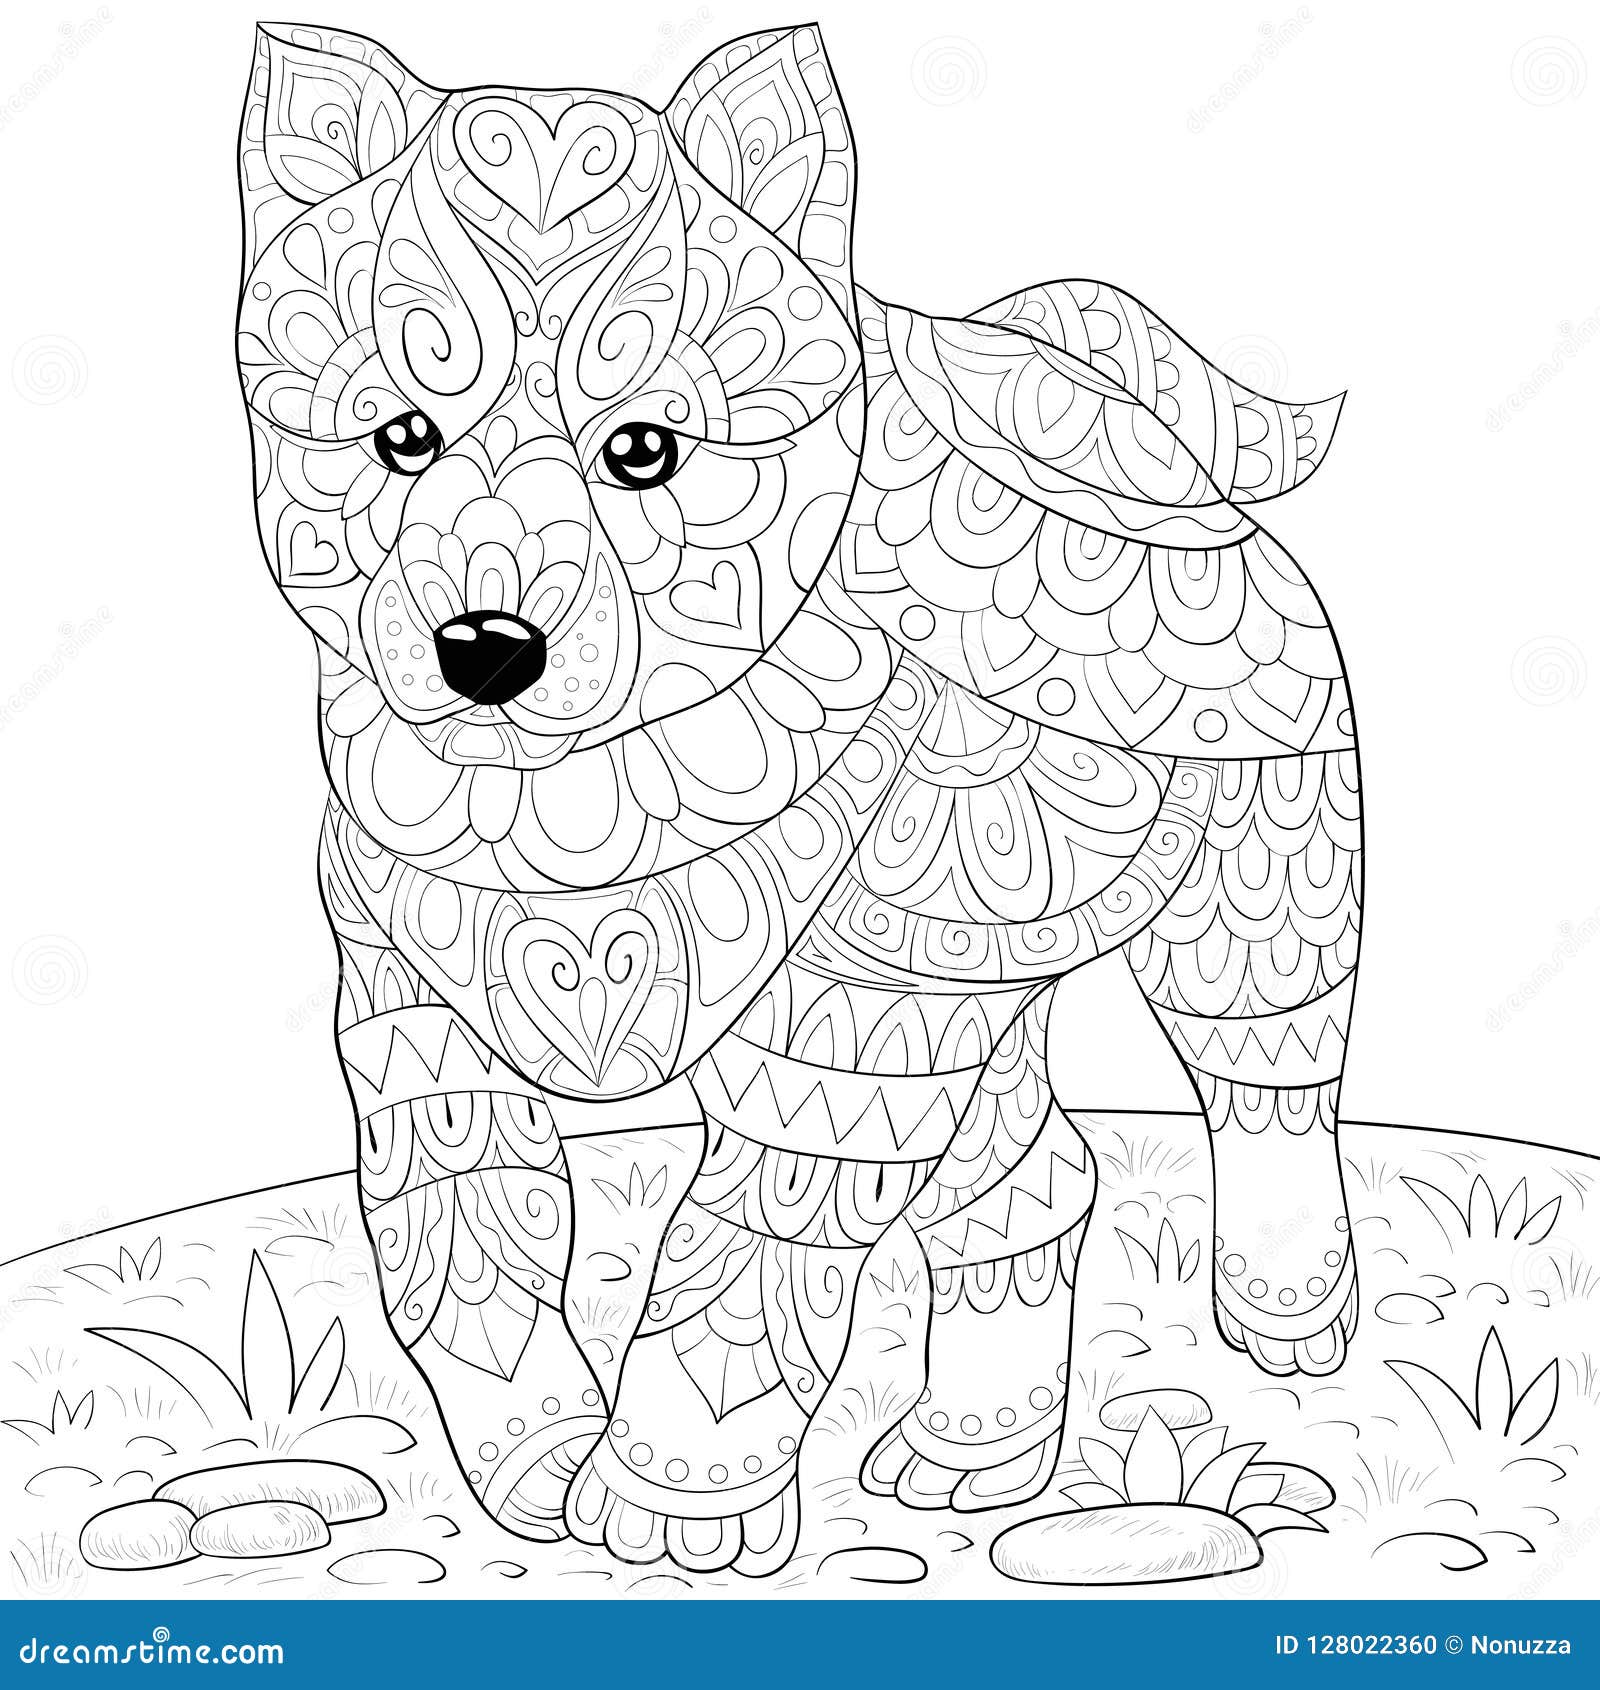 cute little dog image adults zen tangle ornaments illutration relaxing poster design print adult coloring page 128022360